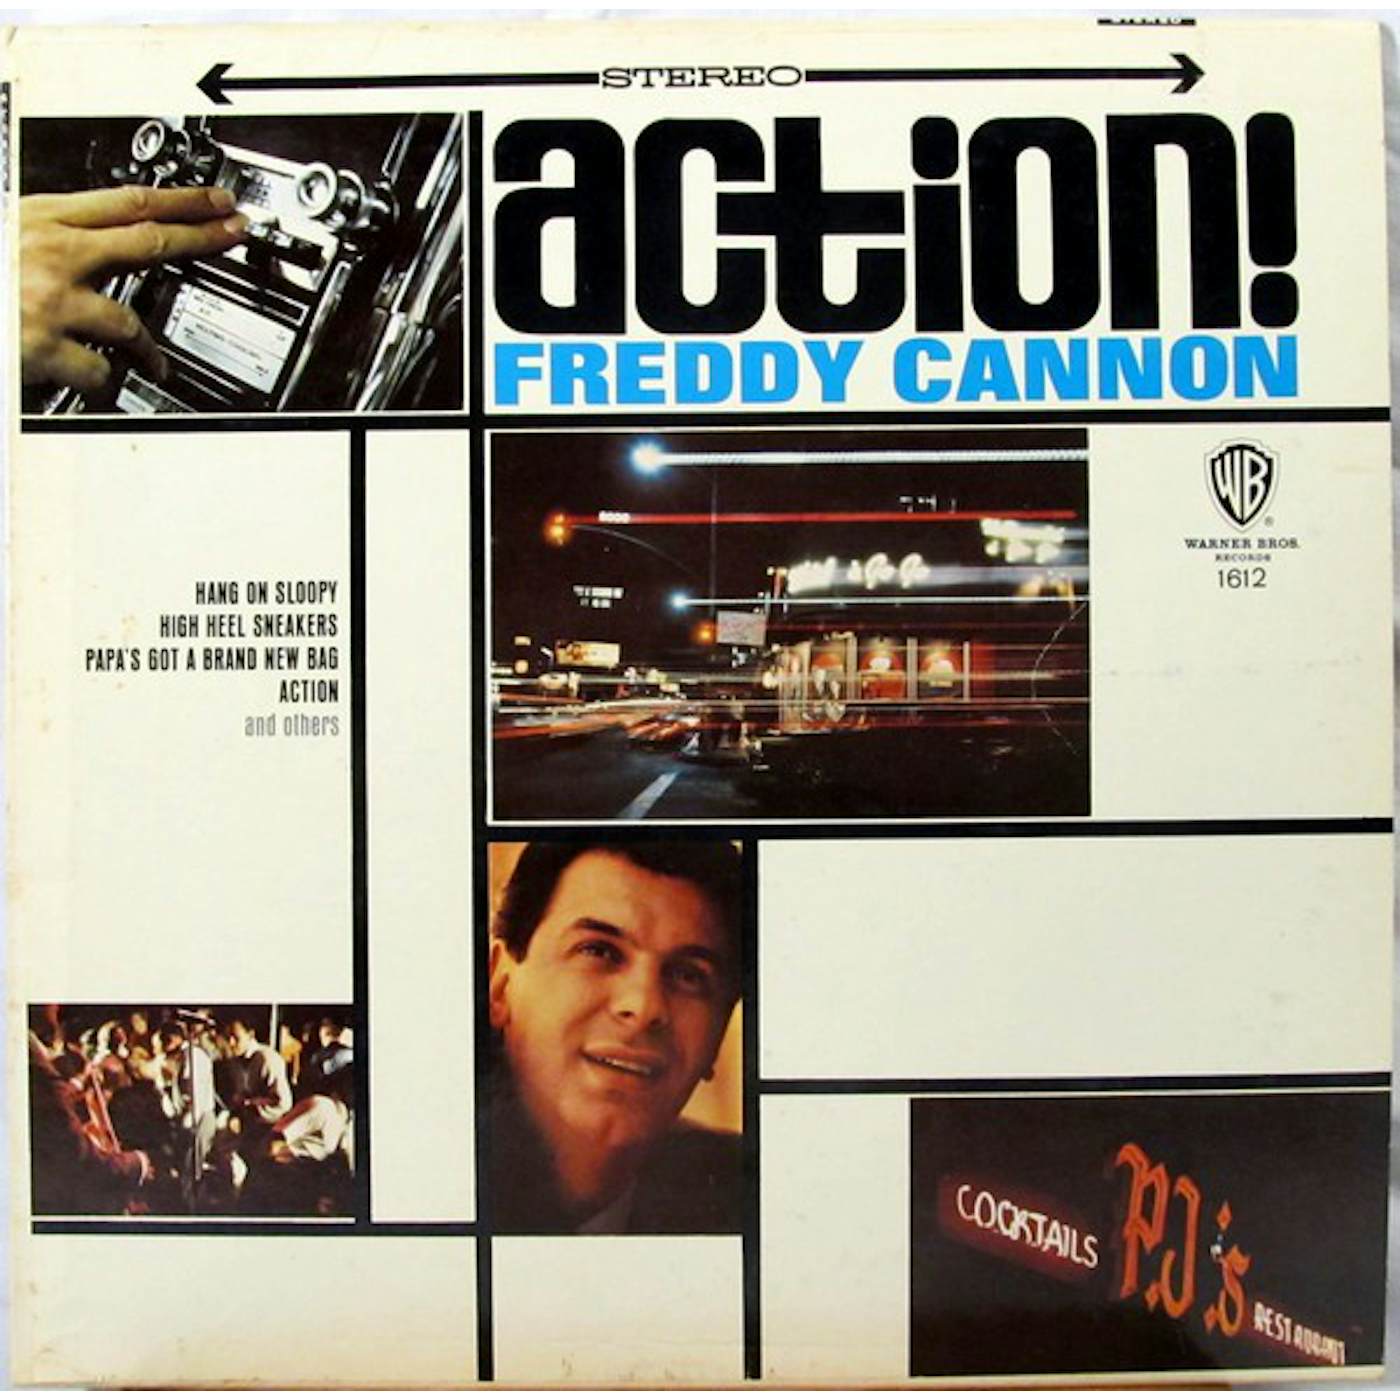 Freddy Cannon ACTION CD